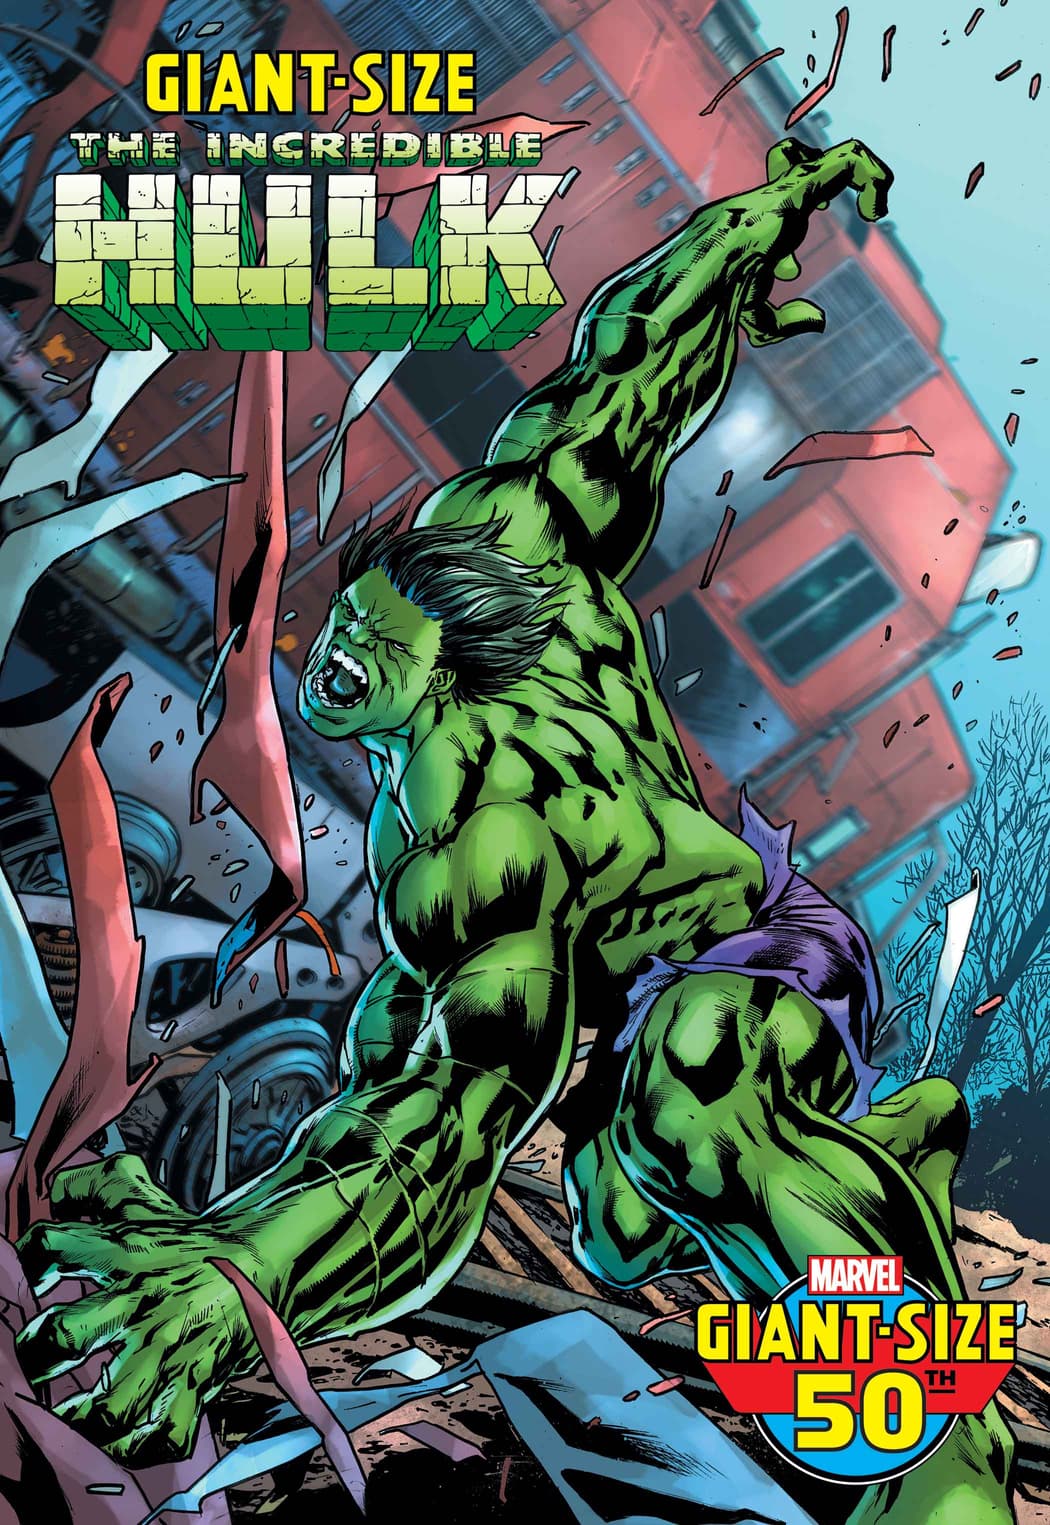 GIANT-SIZE HULK #1 cover by Bryan Hitch